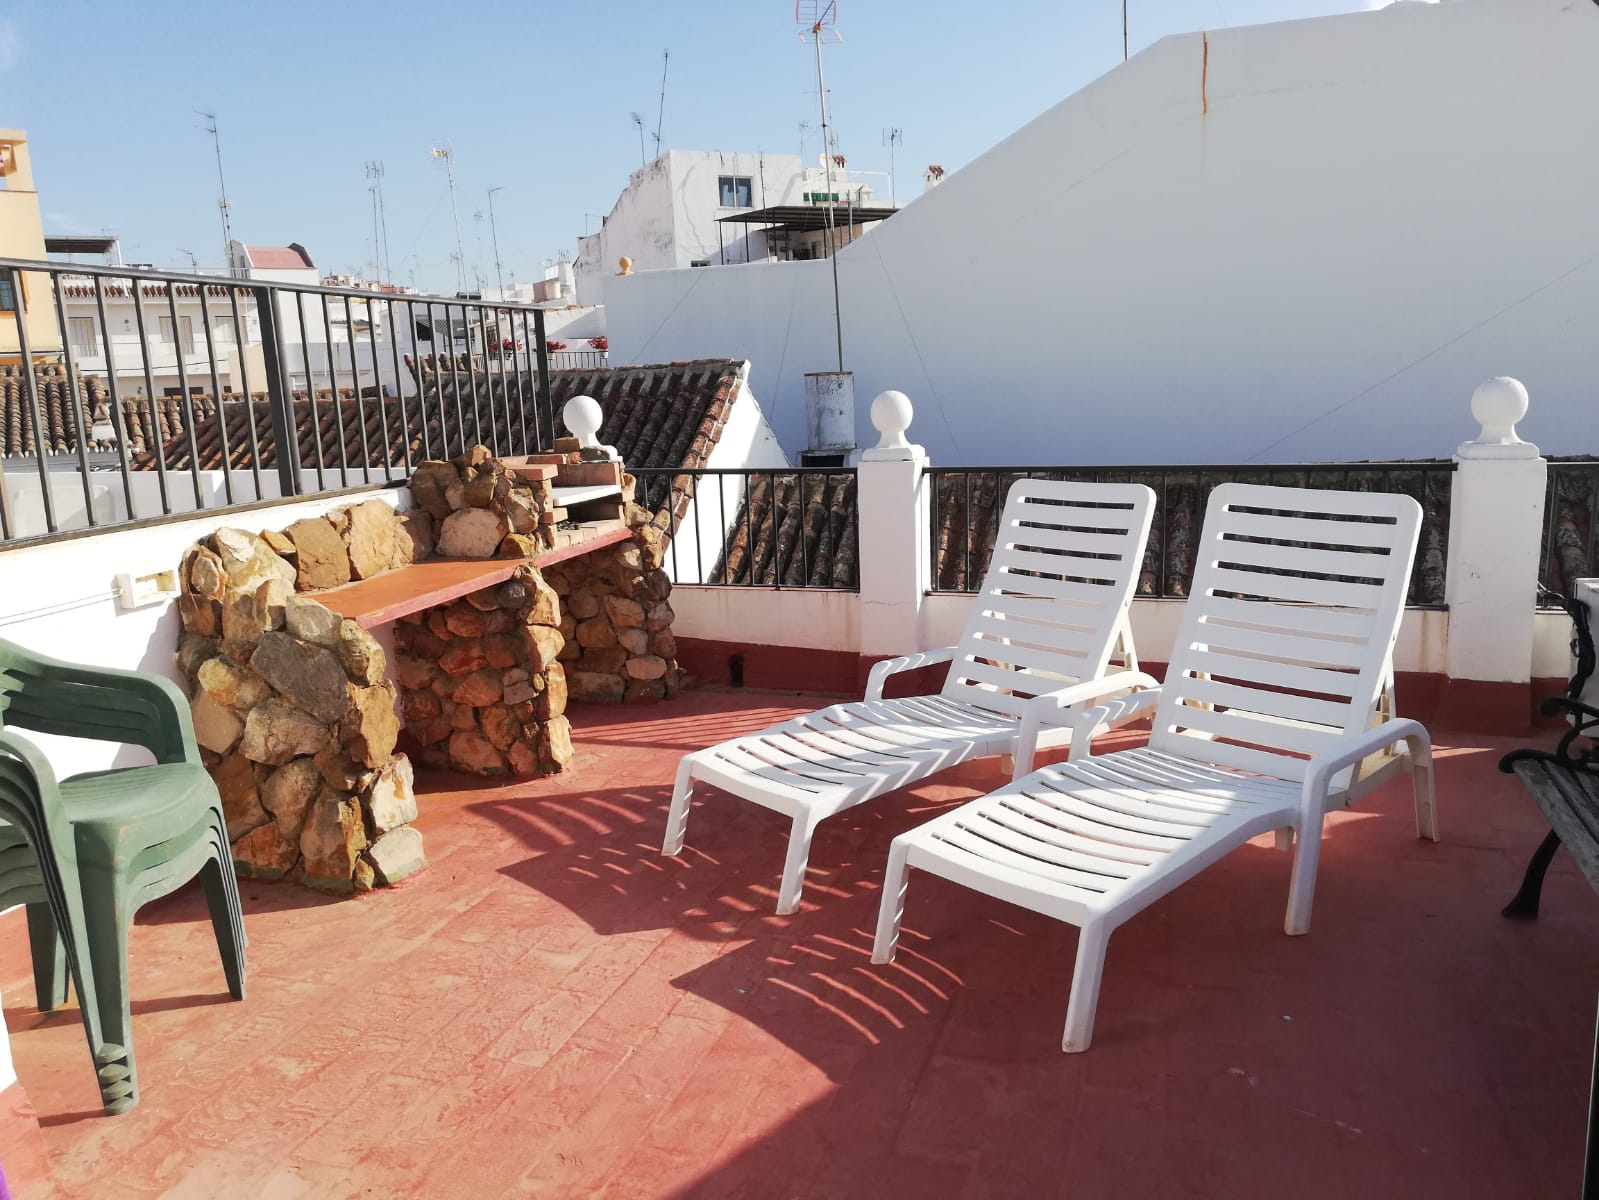 3 bedroom duplex penthouse for rent in the center of Estepona - thumb - mibgroup.es